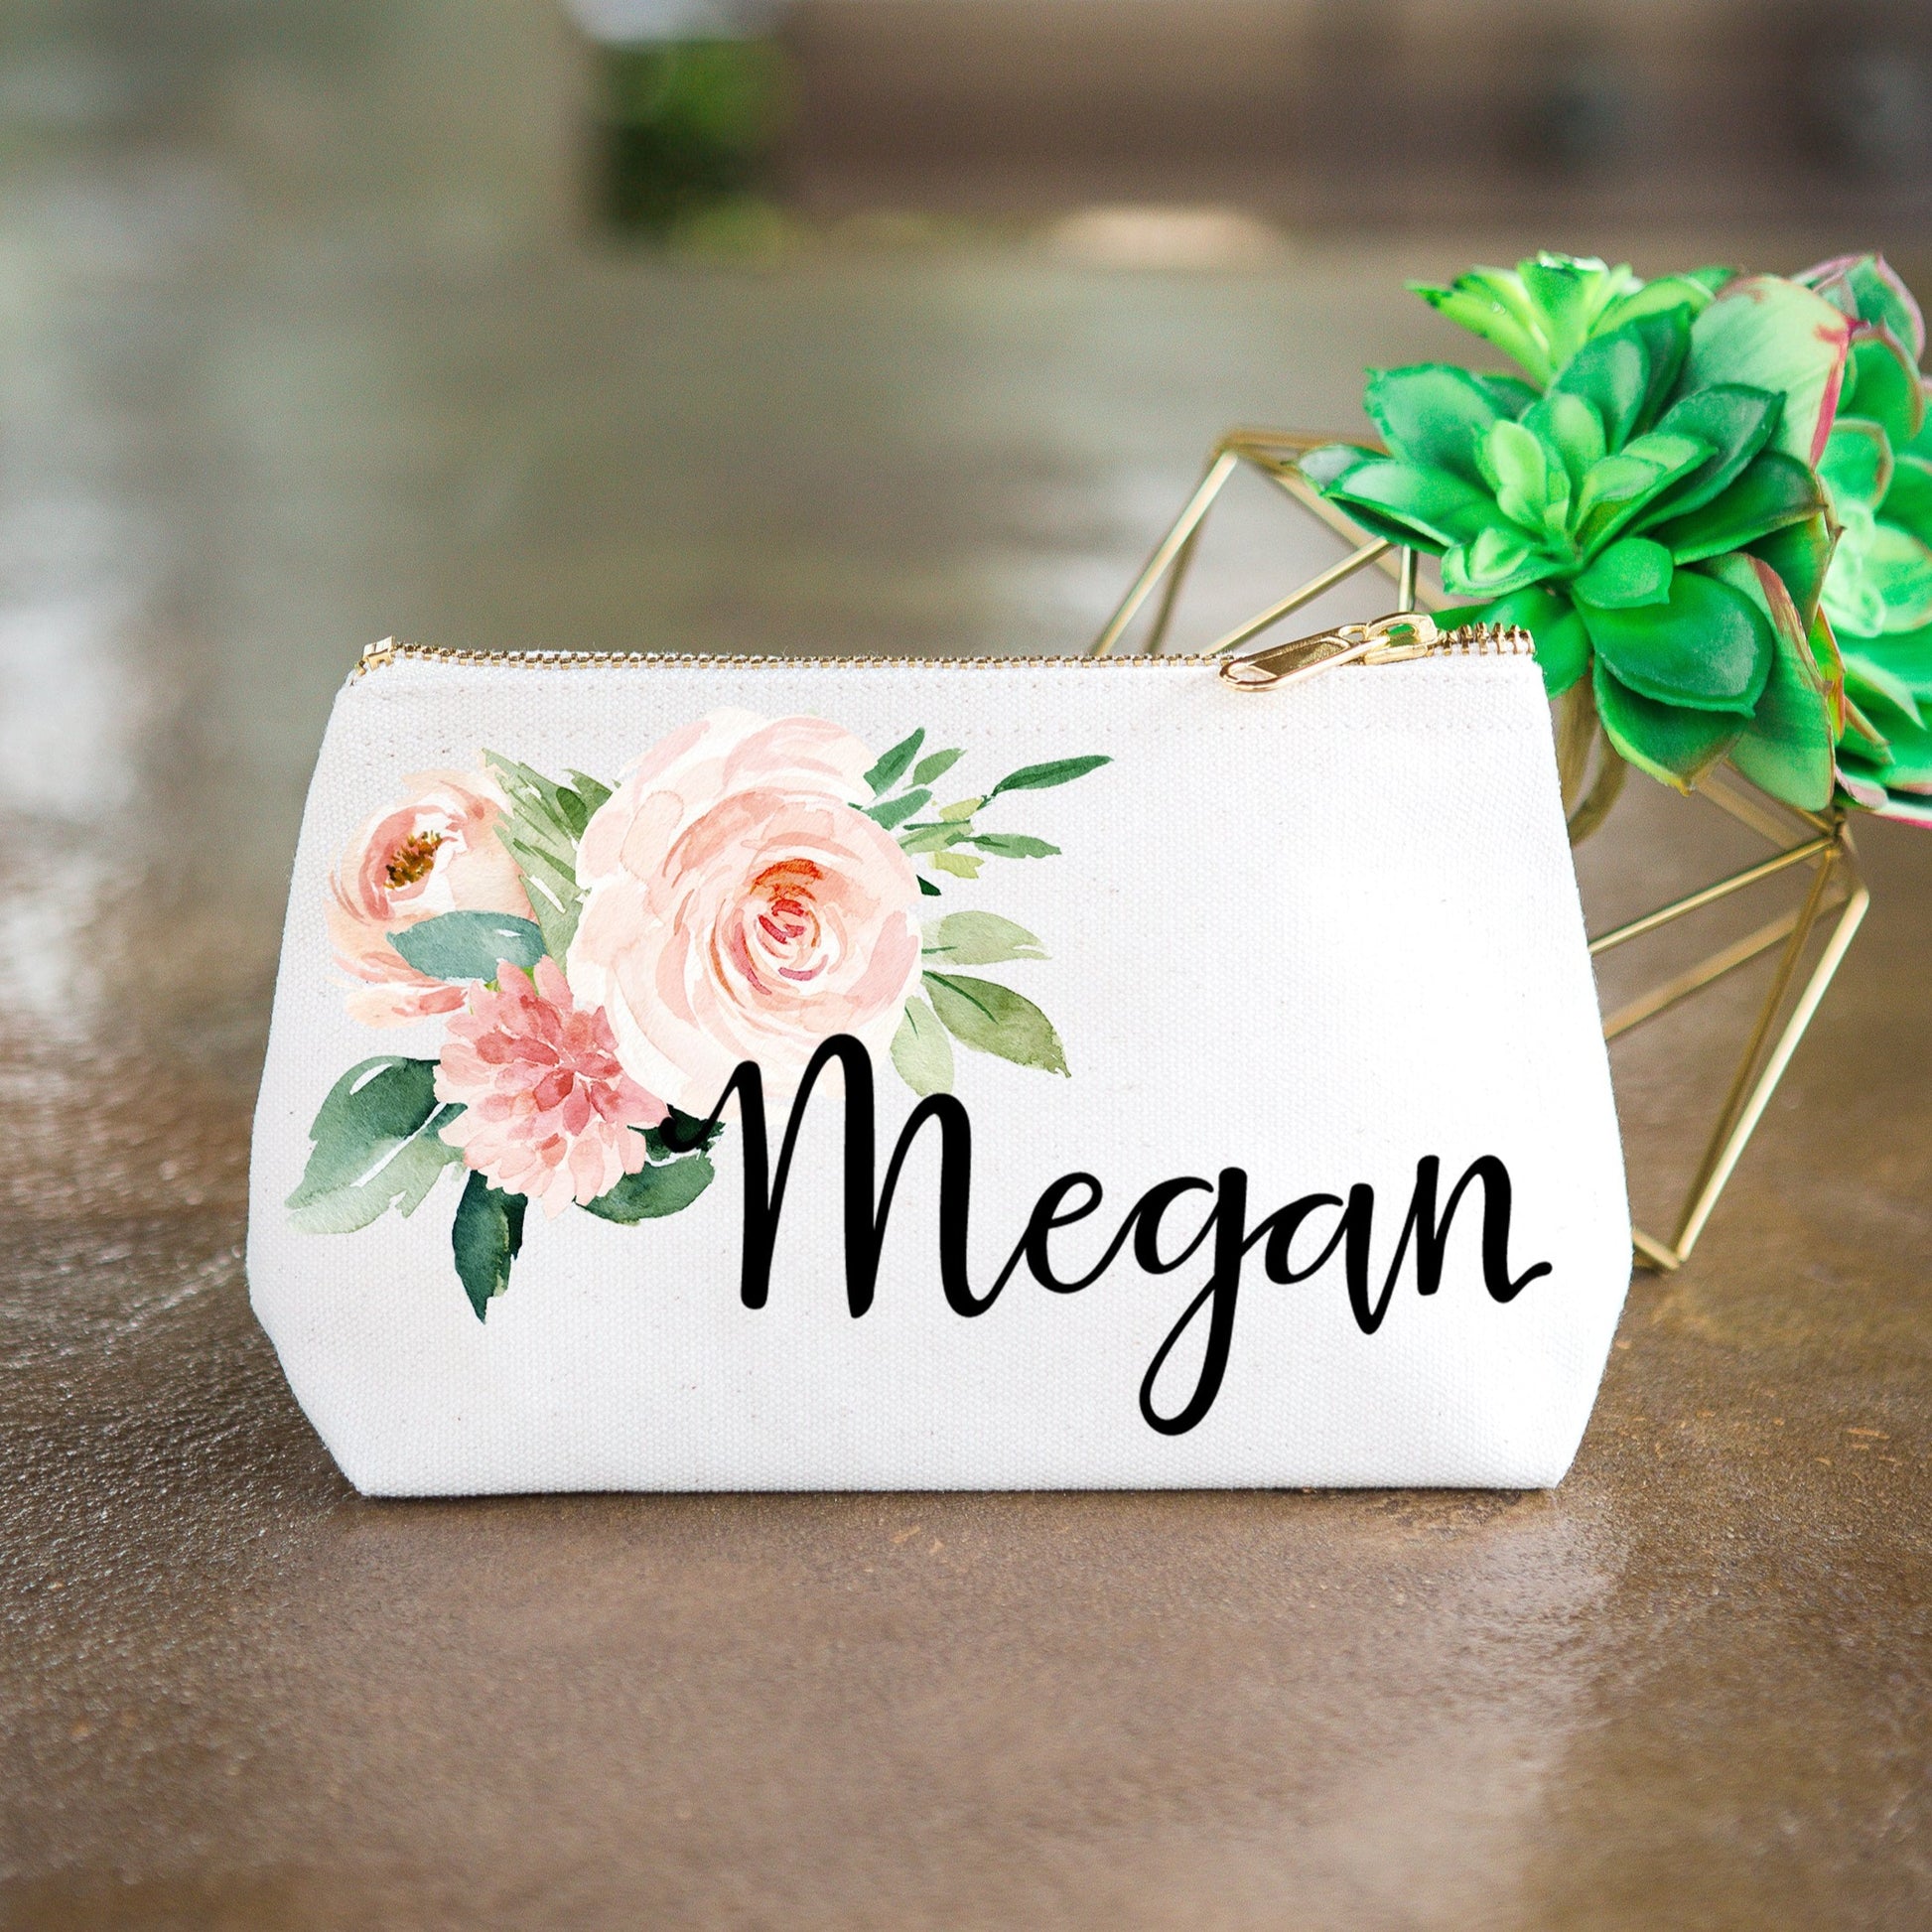 Bridesmaid Cosmetic Bag, Gift for Bridal Party